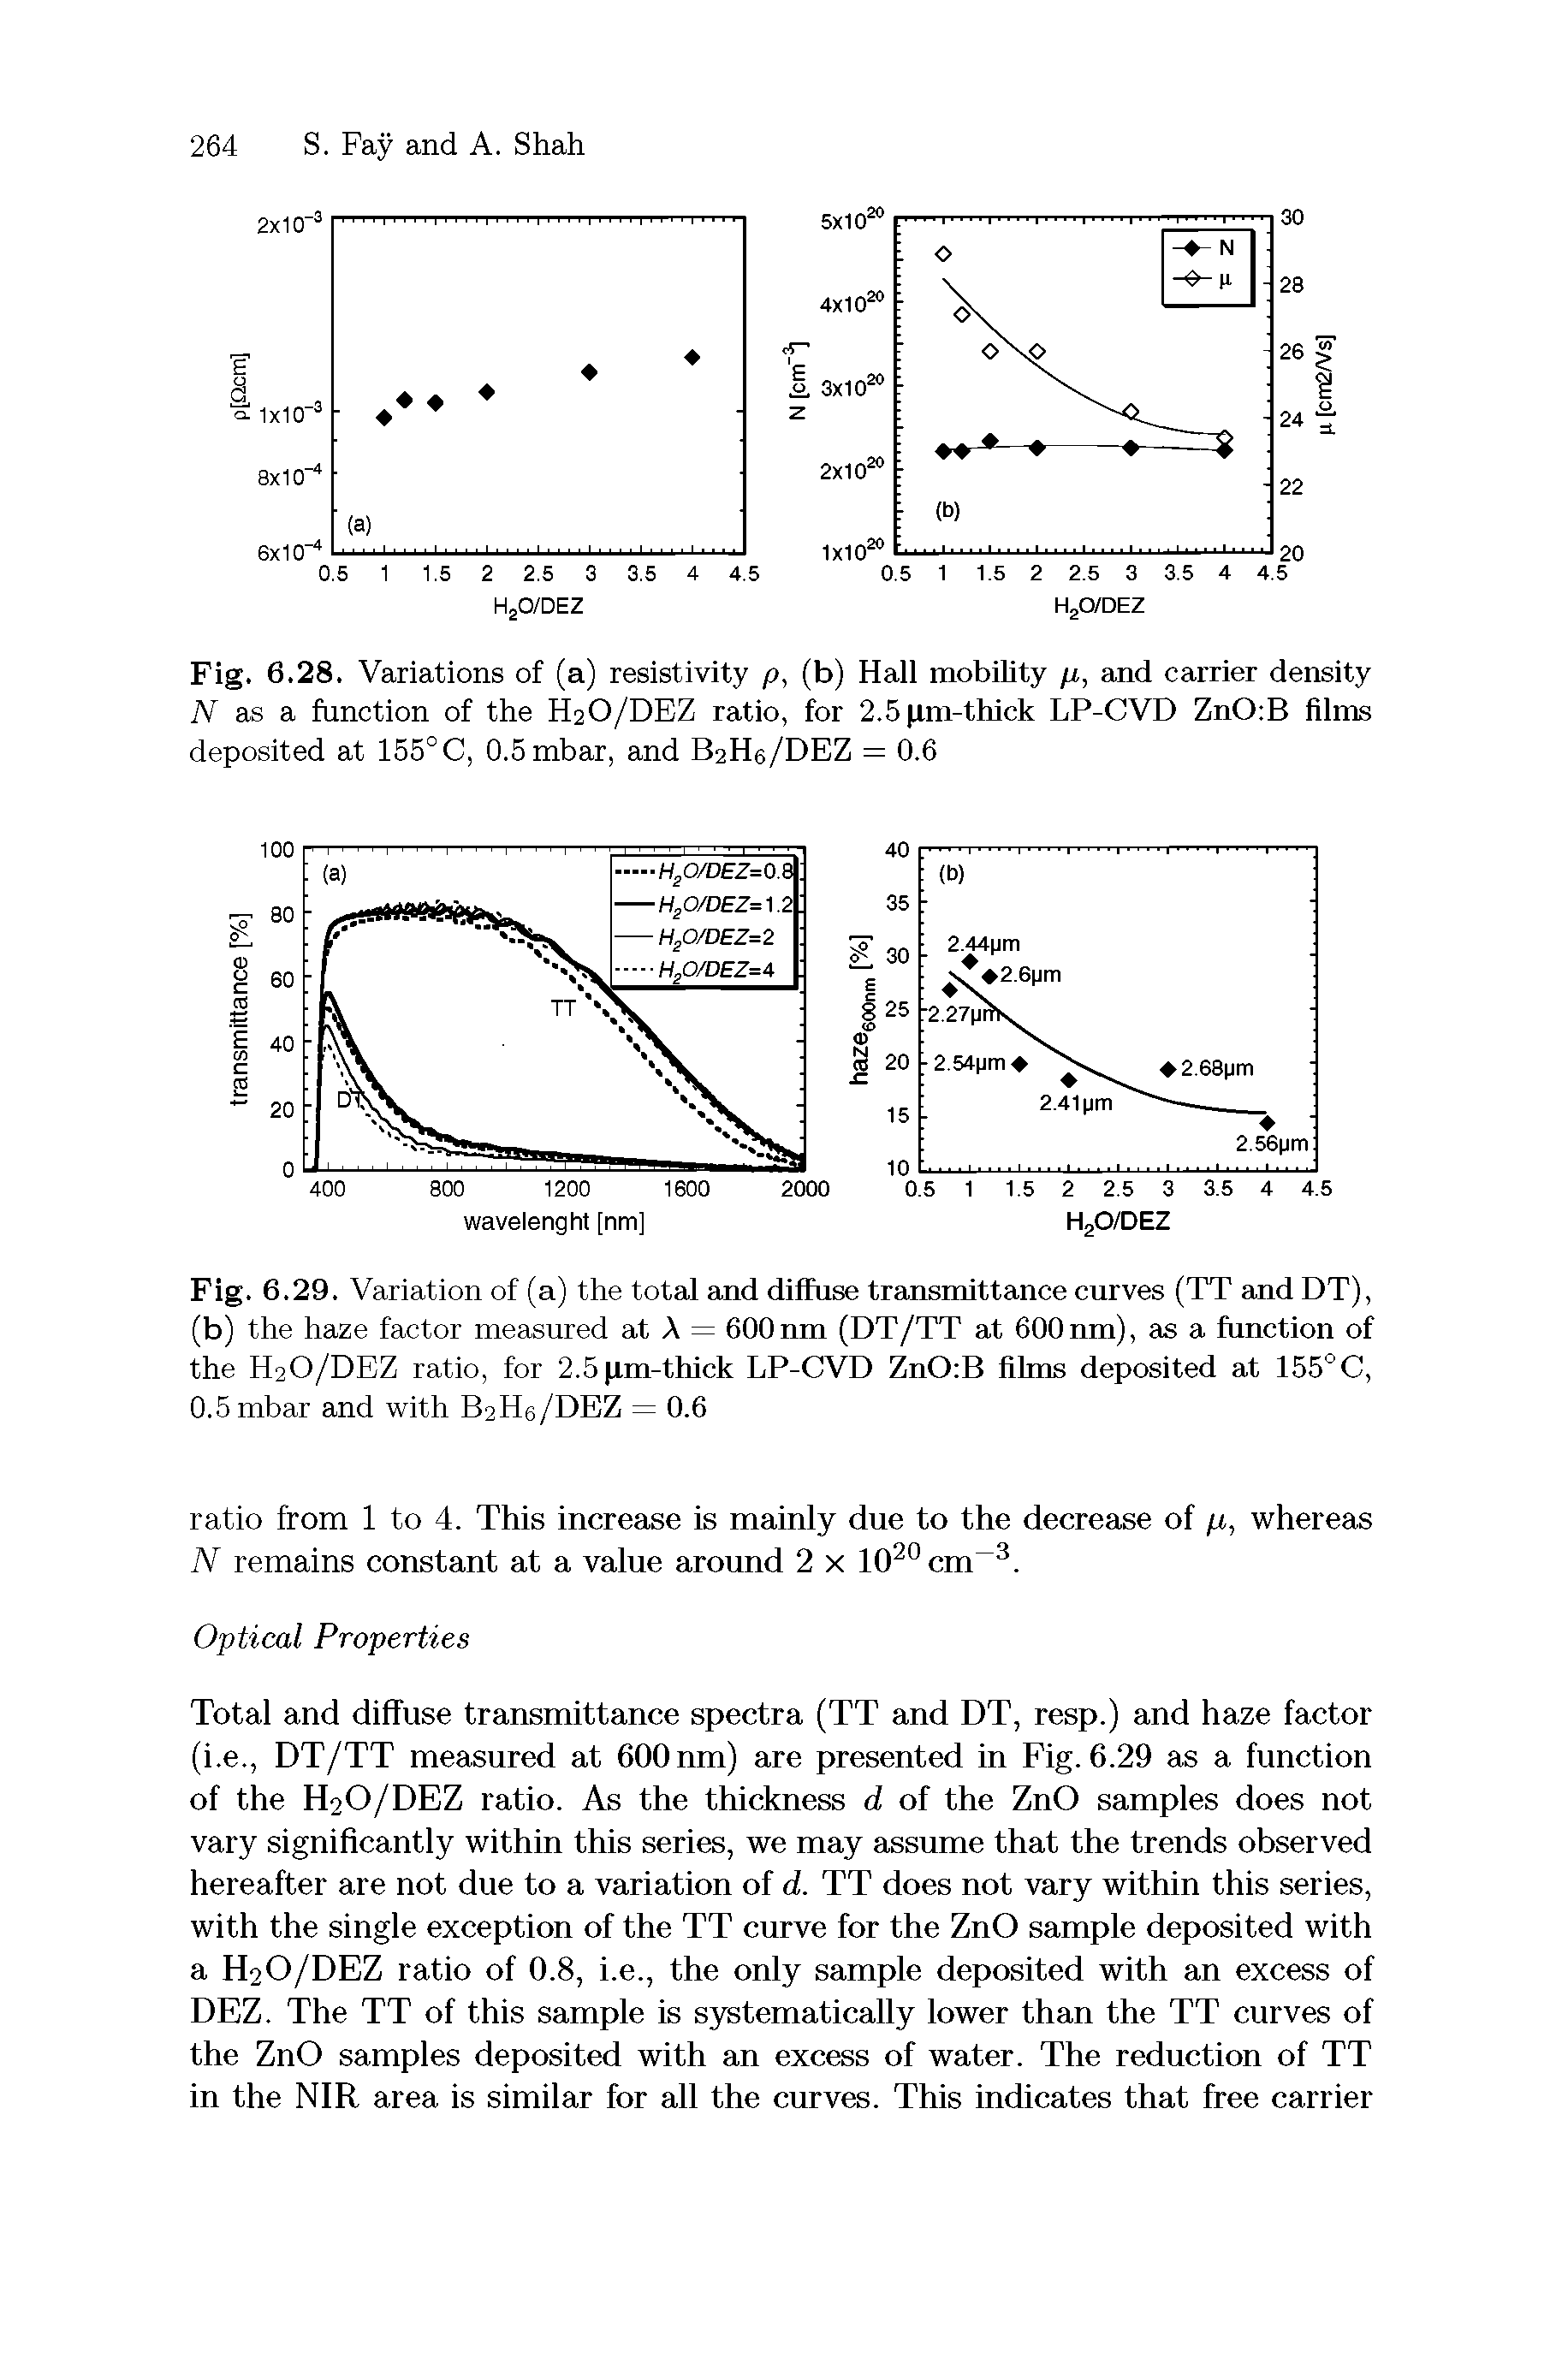 Fig. 6.29. Variation of (a) the total and diffuse transmittance curves (TT and DT), (b) the haze factor measured at A = 600nm (DT/TT at 600nm), as a function of the H2O/DEZ ratio, for 2.5 j,rn-fhick LP-CVD ZnO B films deposited at 155°C, 0.5mbar and with B2H6/DEZ = 0.6...